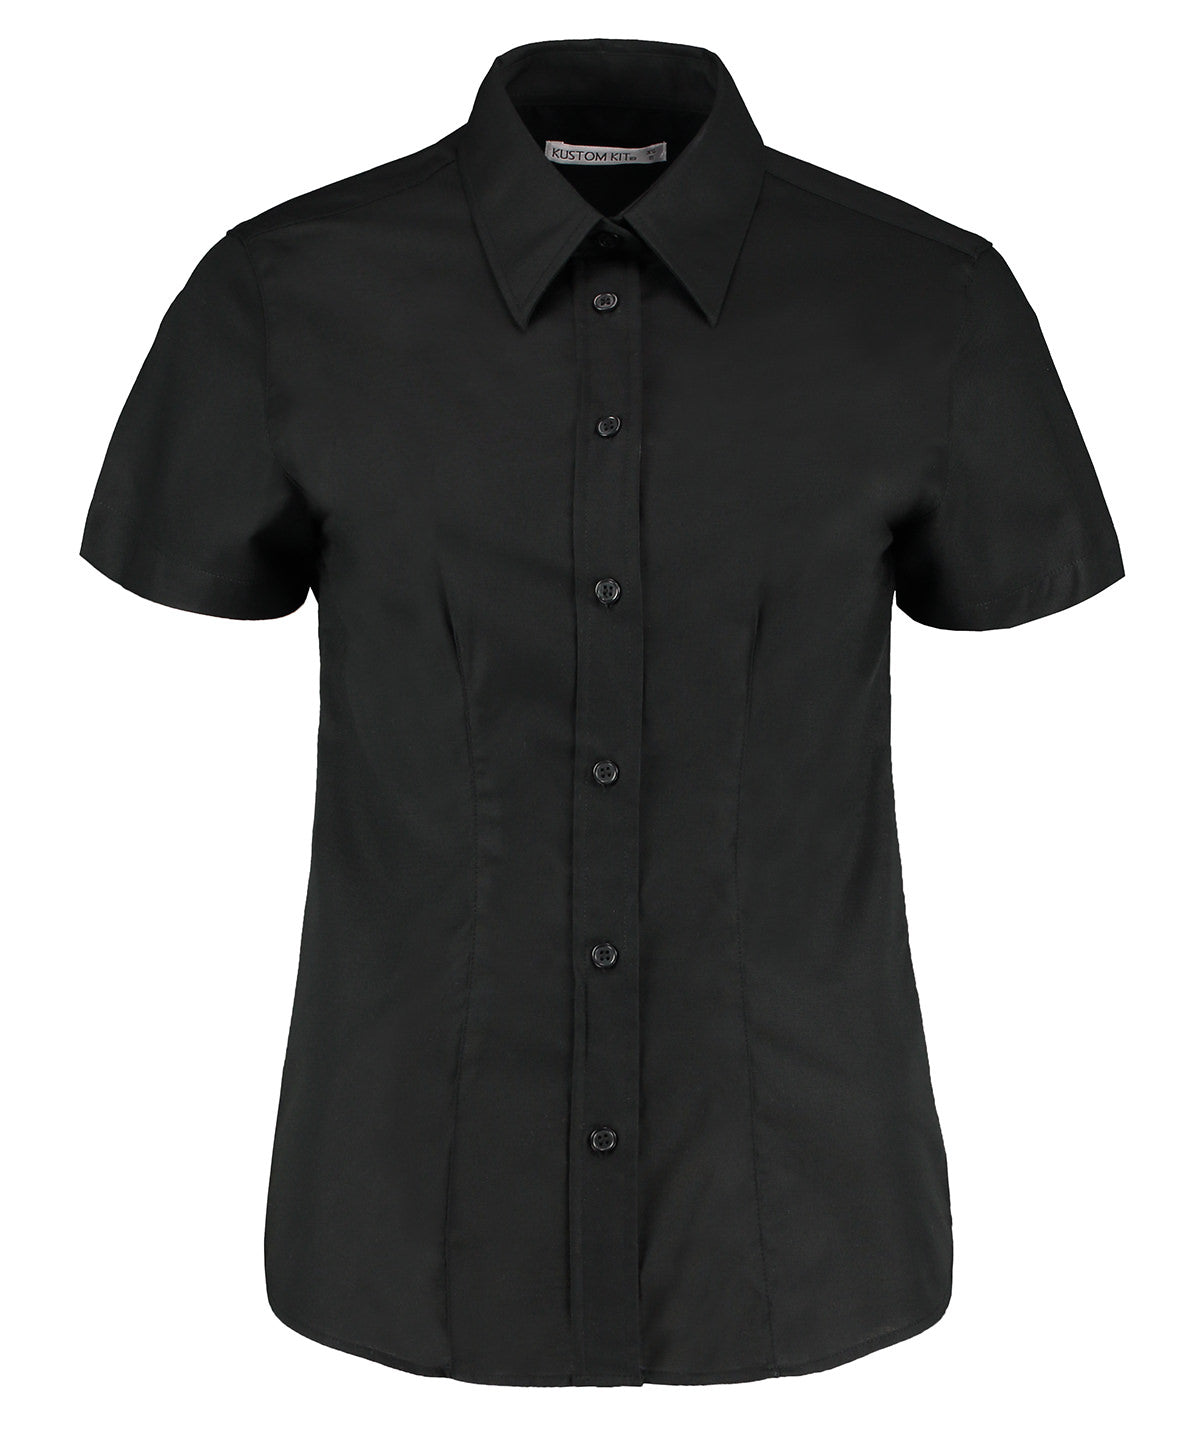 Tailored Fit Short Sleeve Workwear Oxford Shirt - COOZO